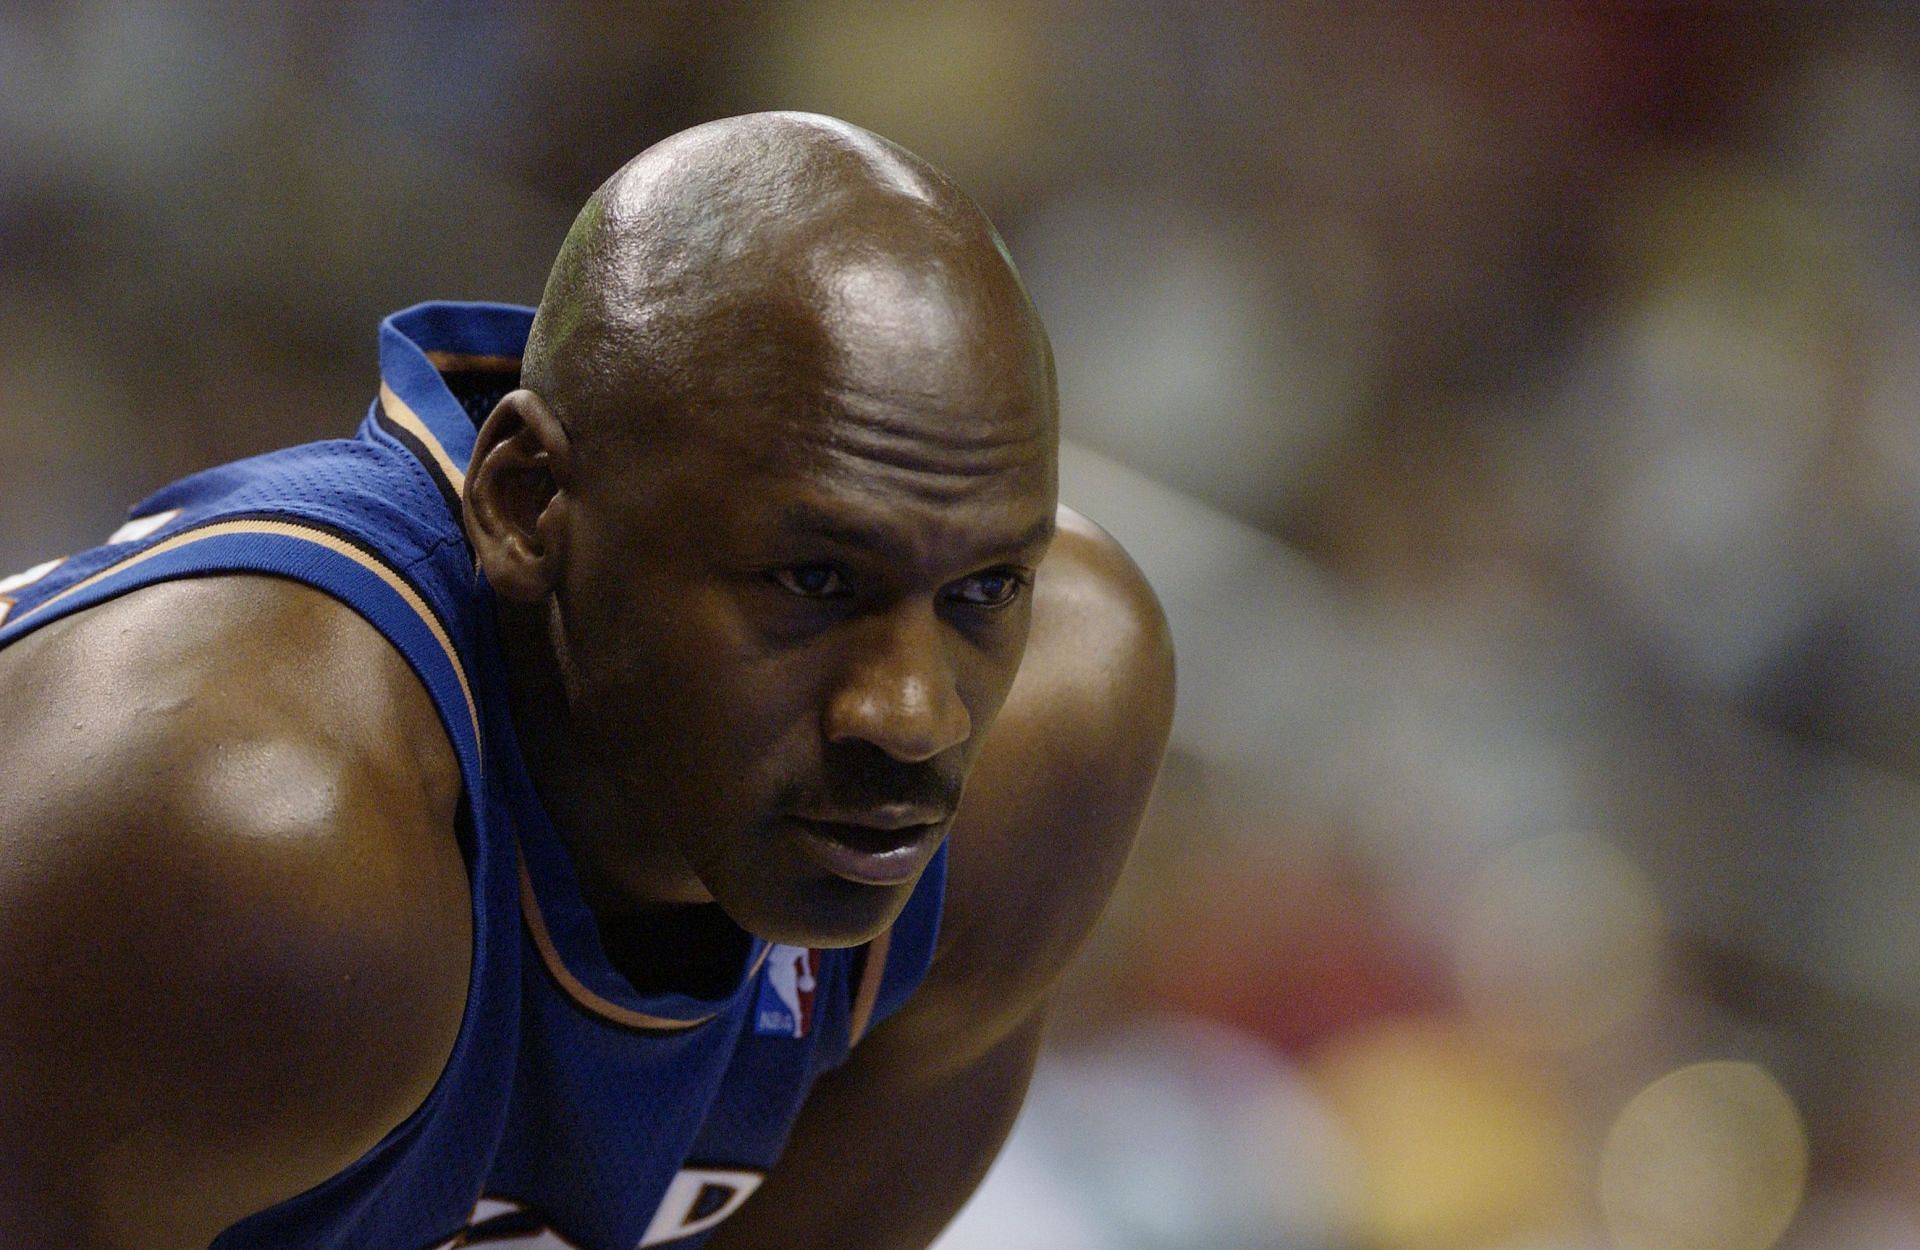 Michael Jordan during his time with the Washinton Wizards